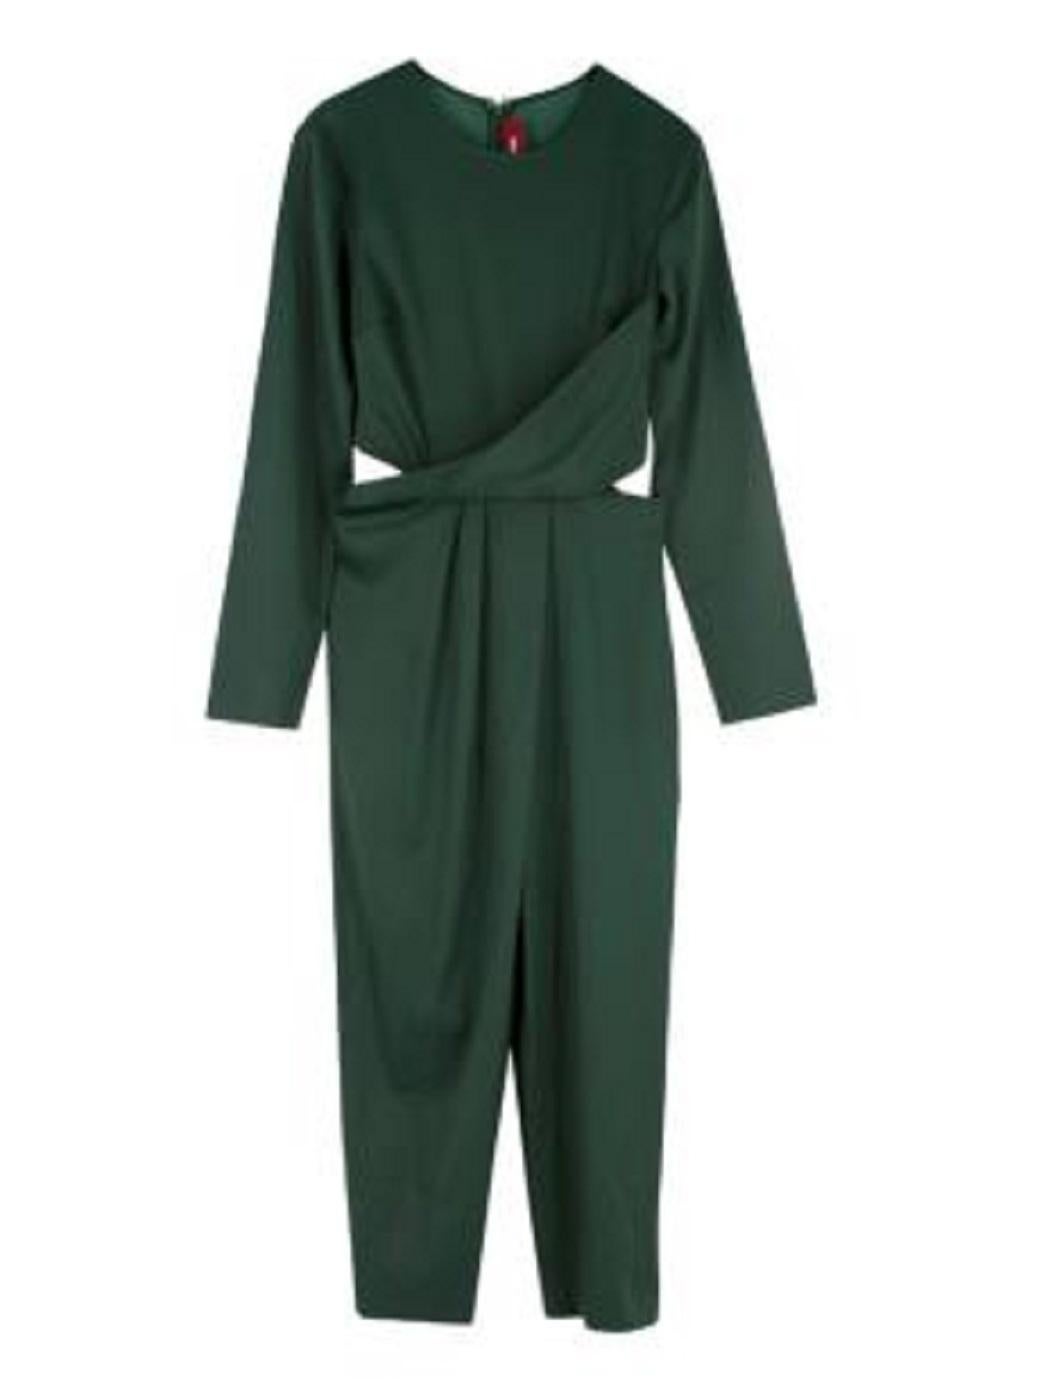 Sies Marjan Pia Bottle Green Satin Cut-Out Waist Jumpsuit

- Stunning deep bottle green fluid fabric
- Round neck, long sleeve
- Twisted waist detail, with side cut-outs
- Wide, slightly cropped leg
- Concealed back zip fastening
- Fully lined in